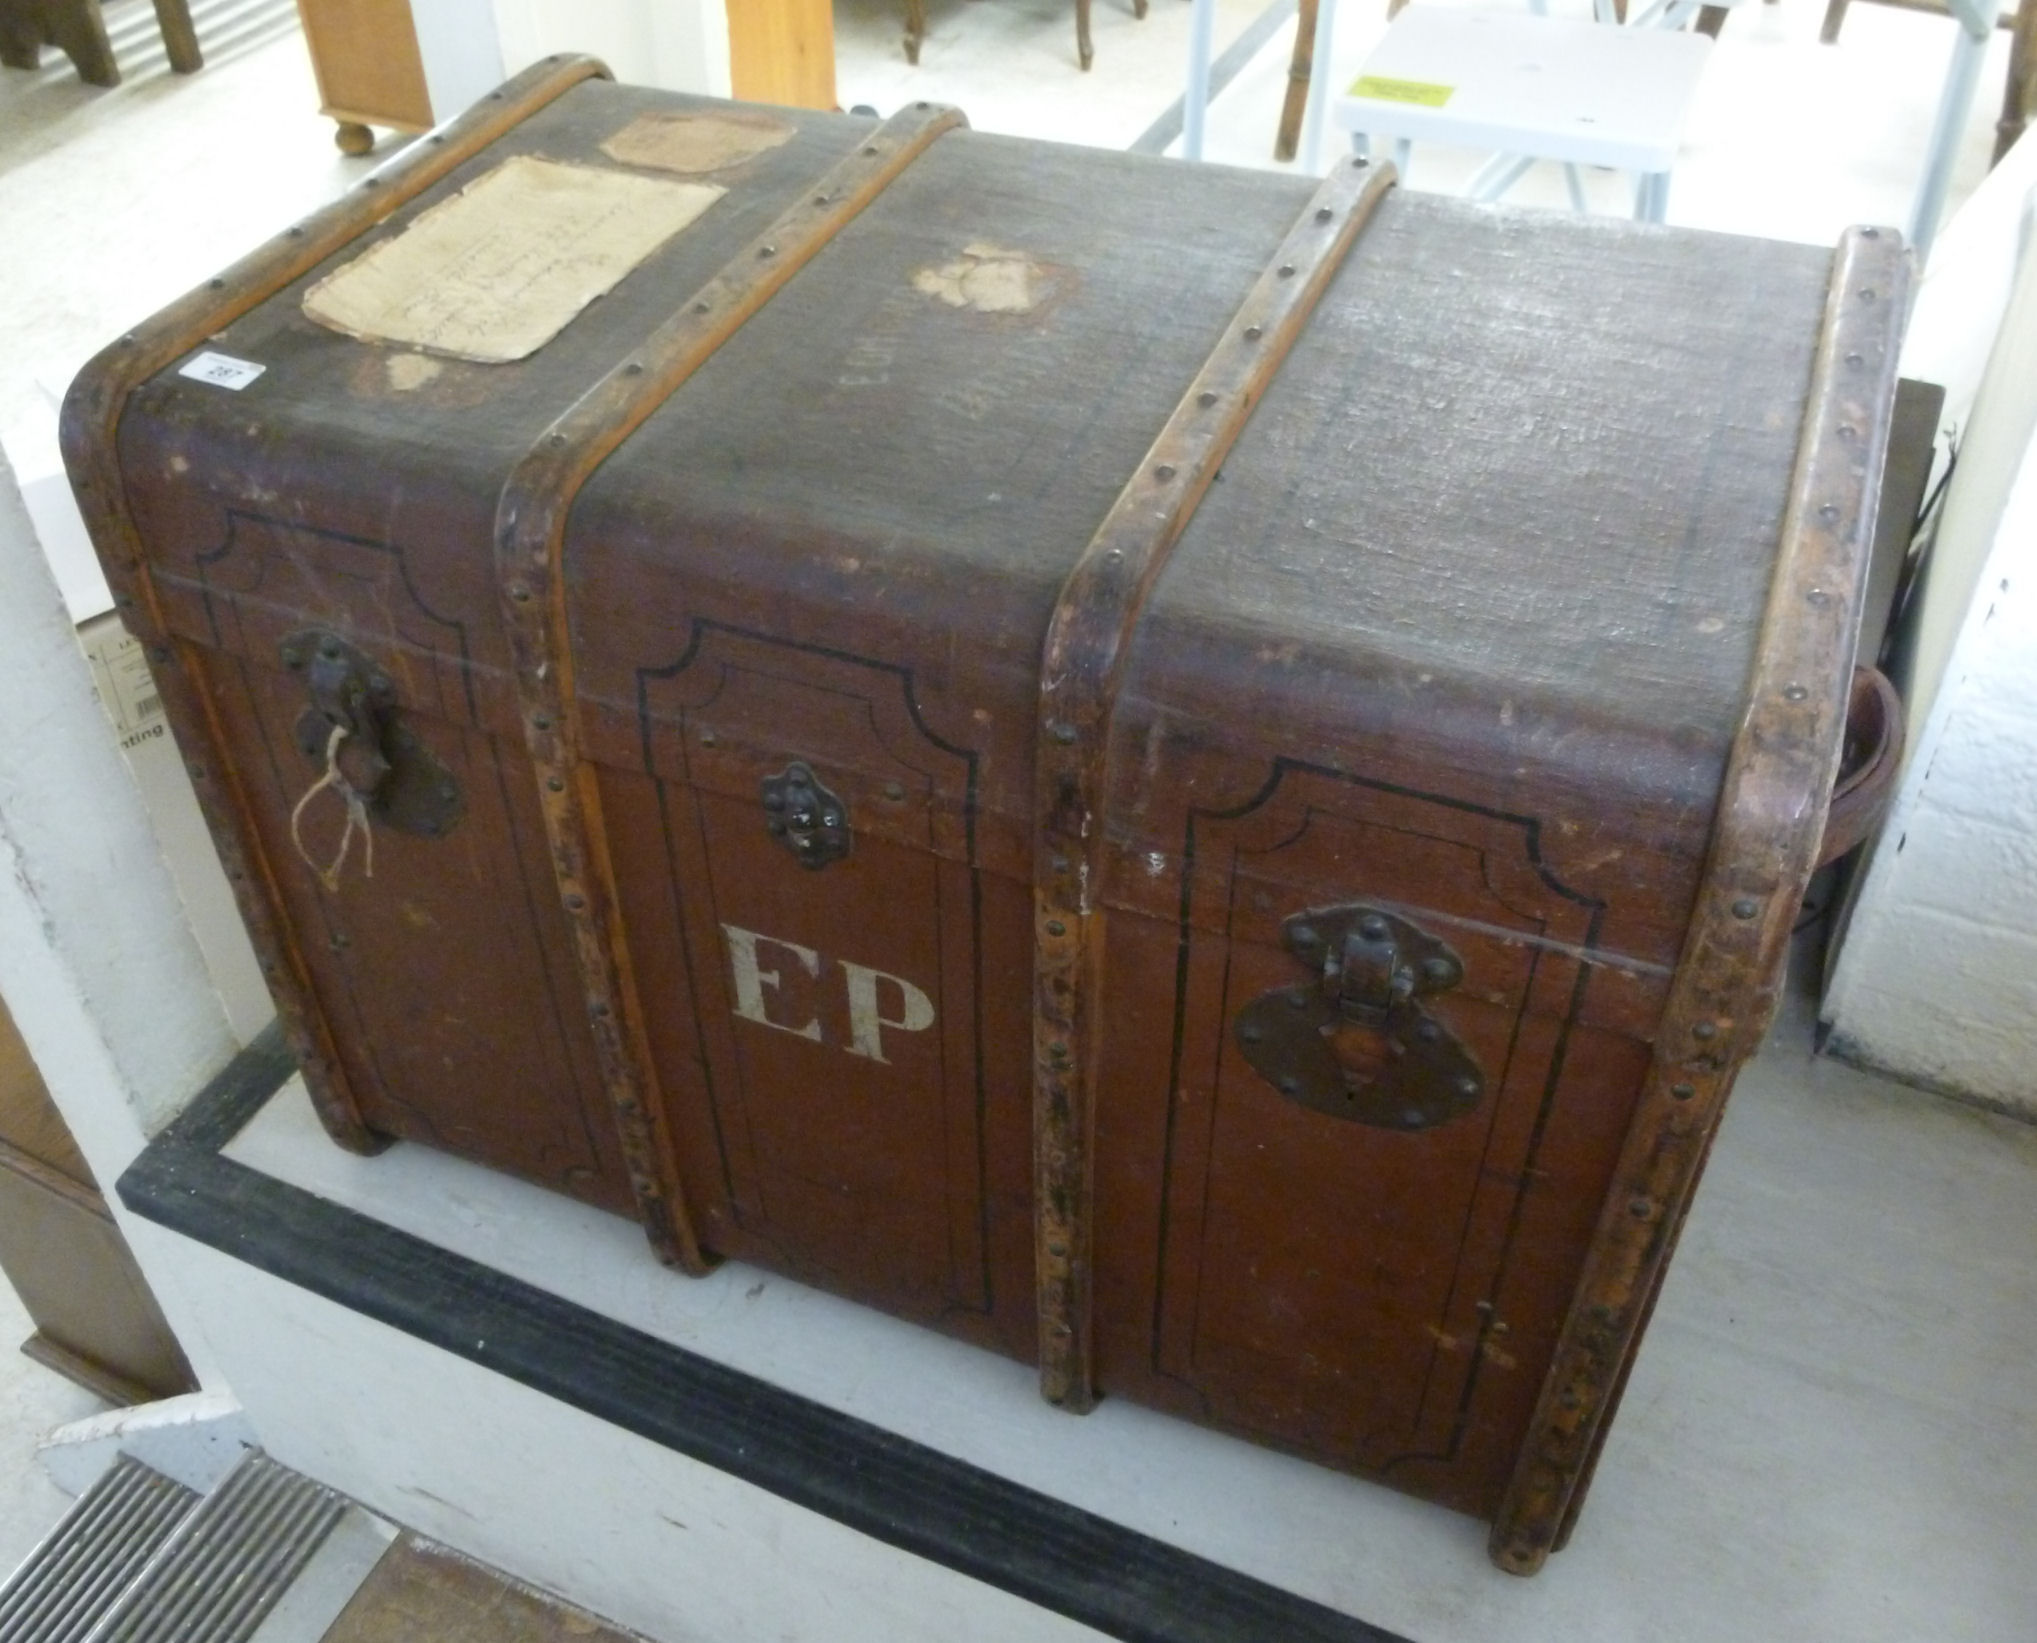 An early 20thC canvas clad trunk with st